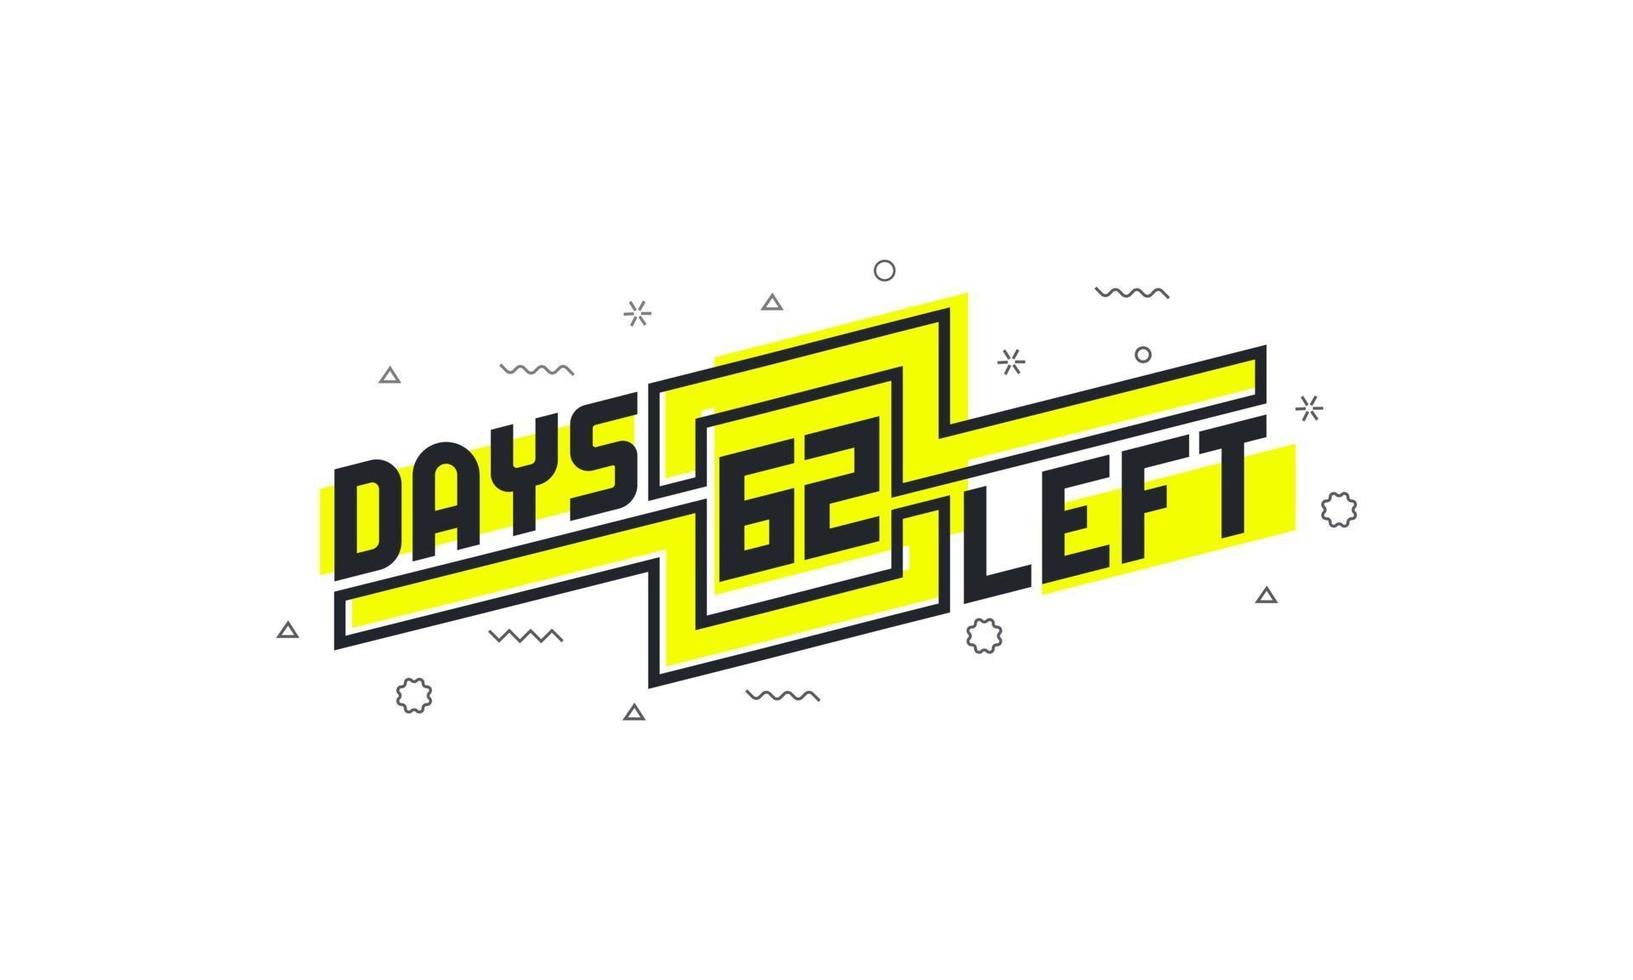 62 days left countdown sign for sale or promotion. vector